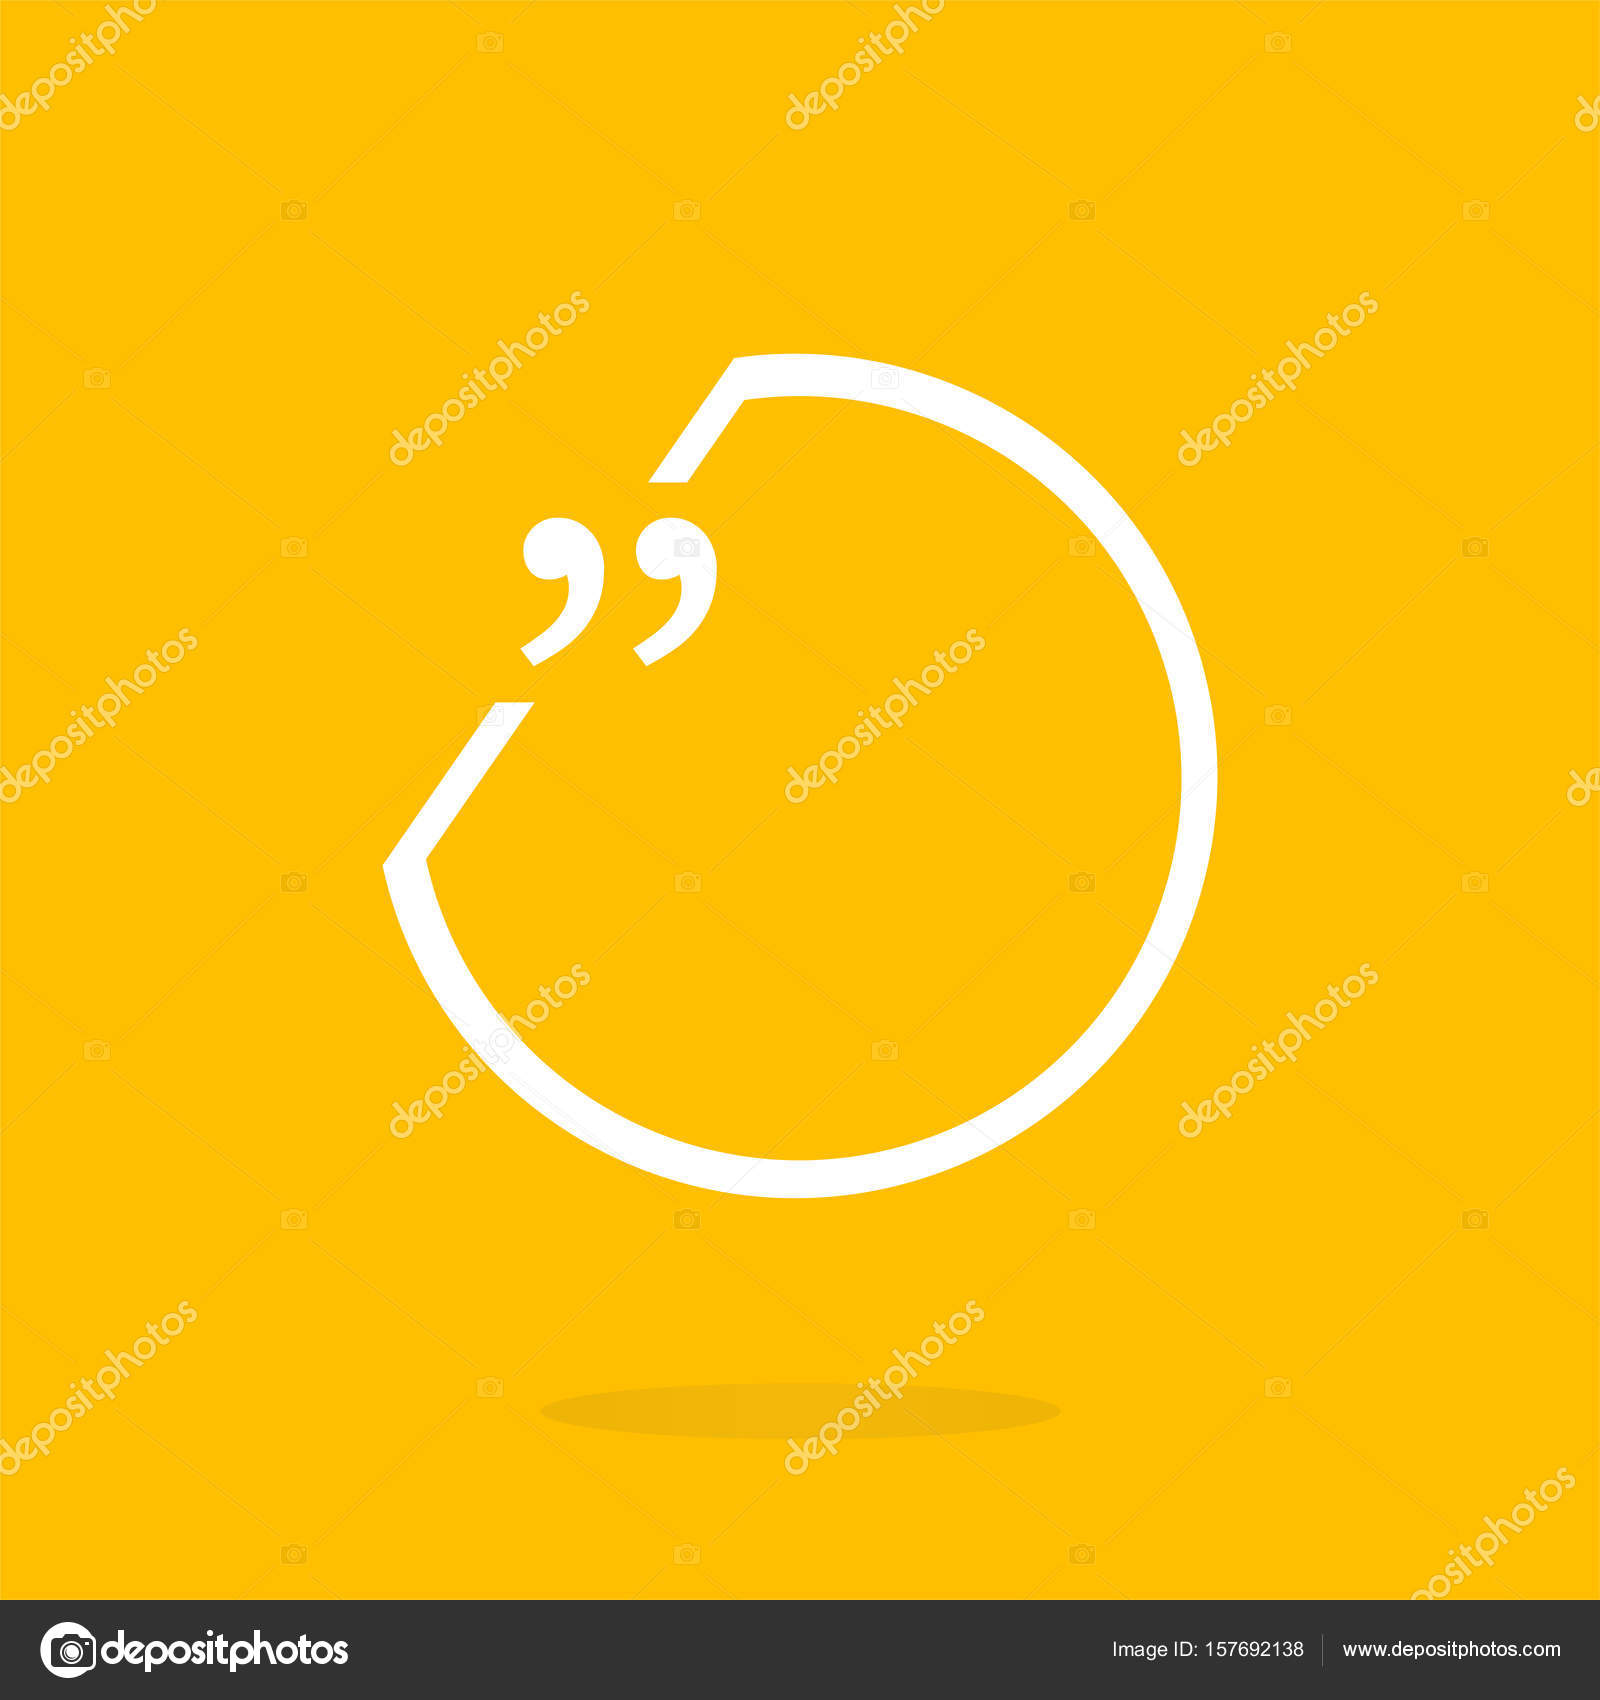 Quotation Mark Speech Bubble. Quote sign icon. Abstract background ...